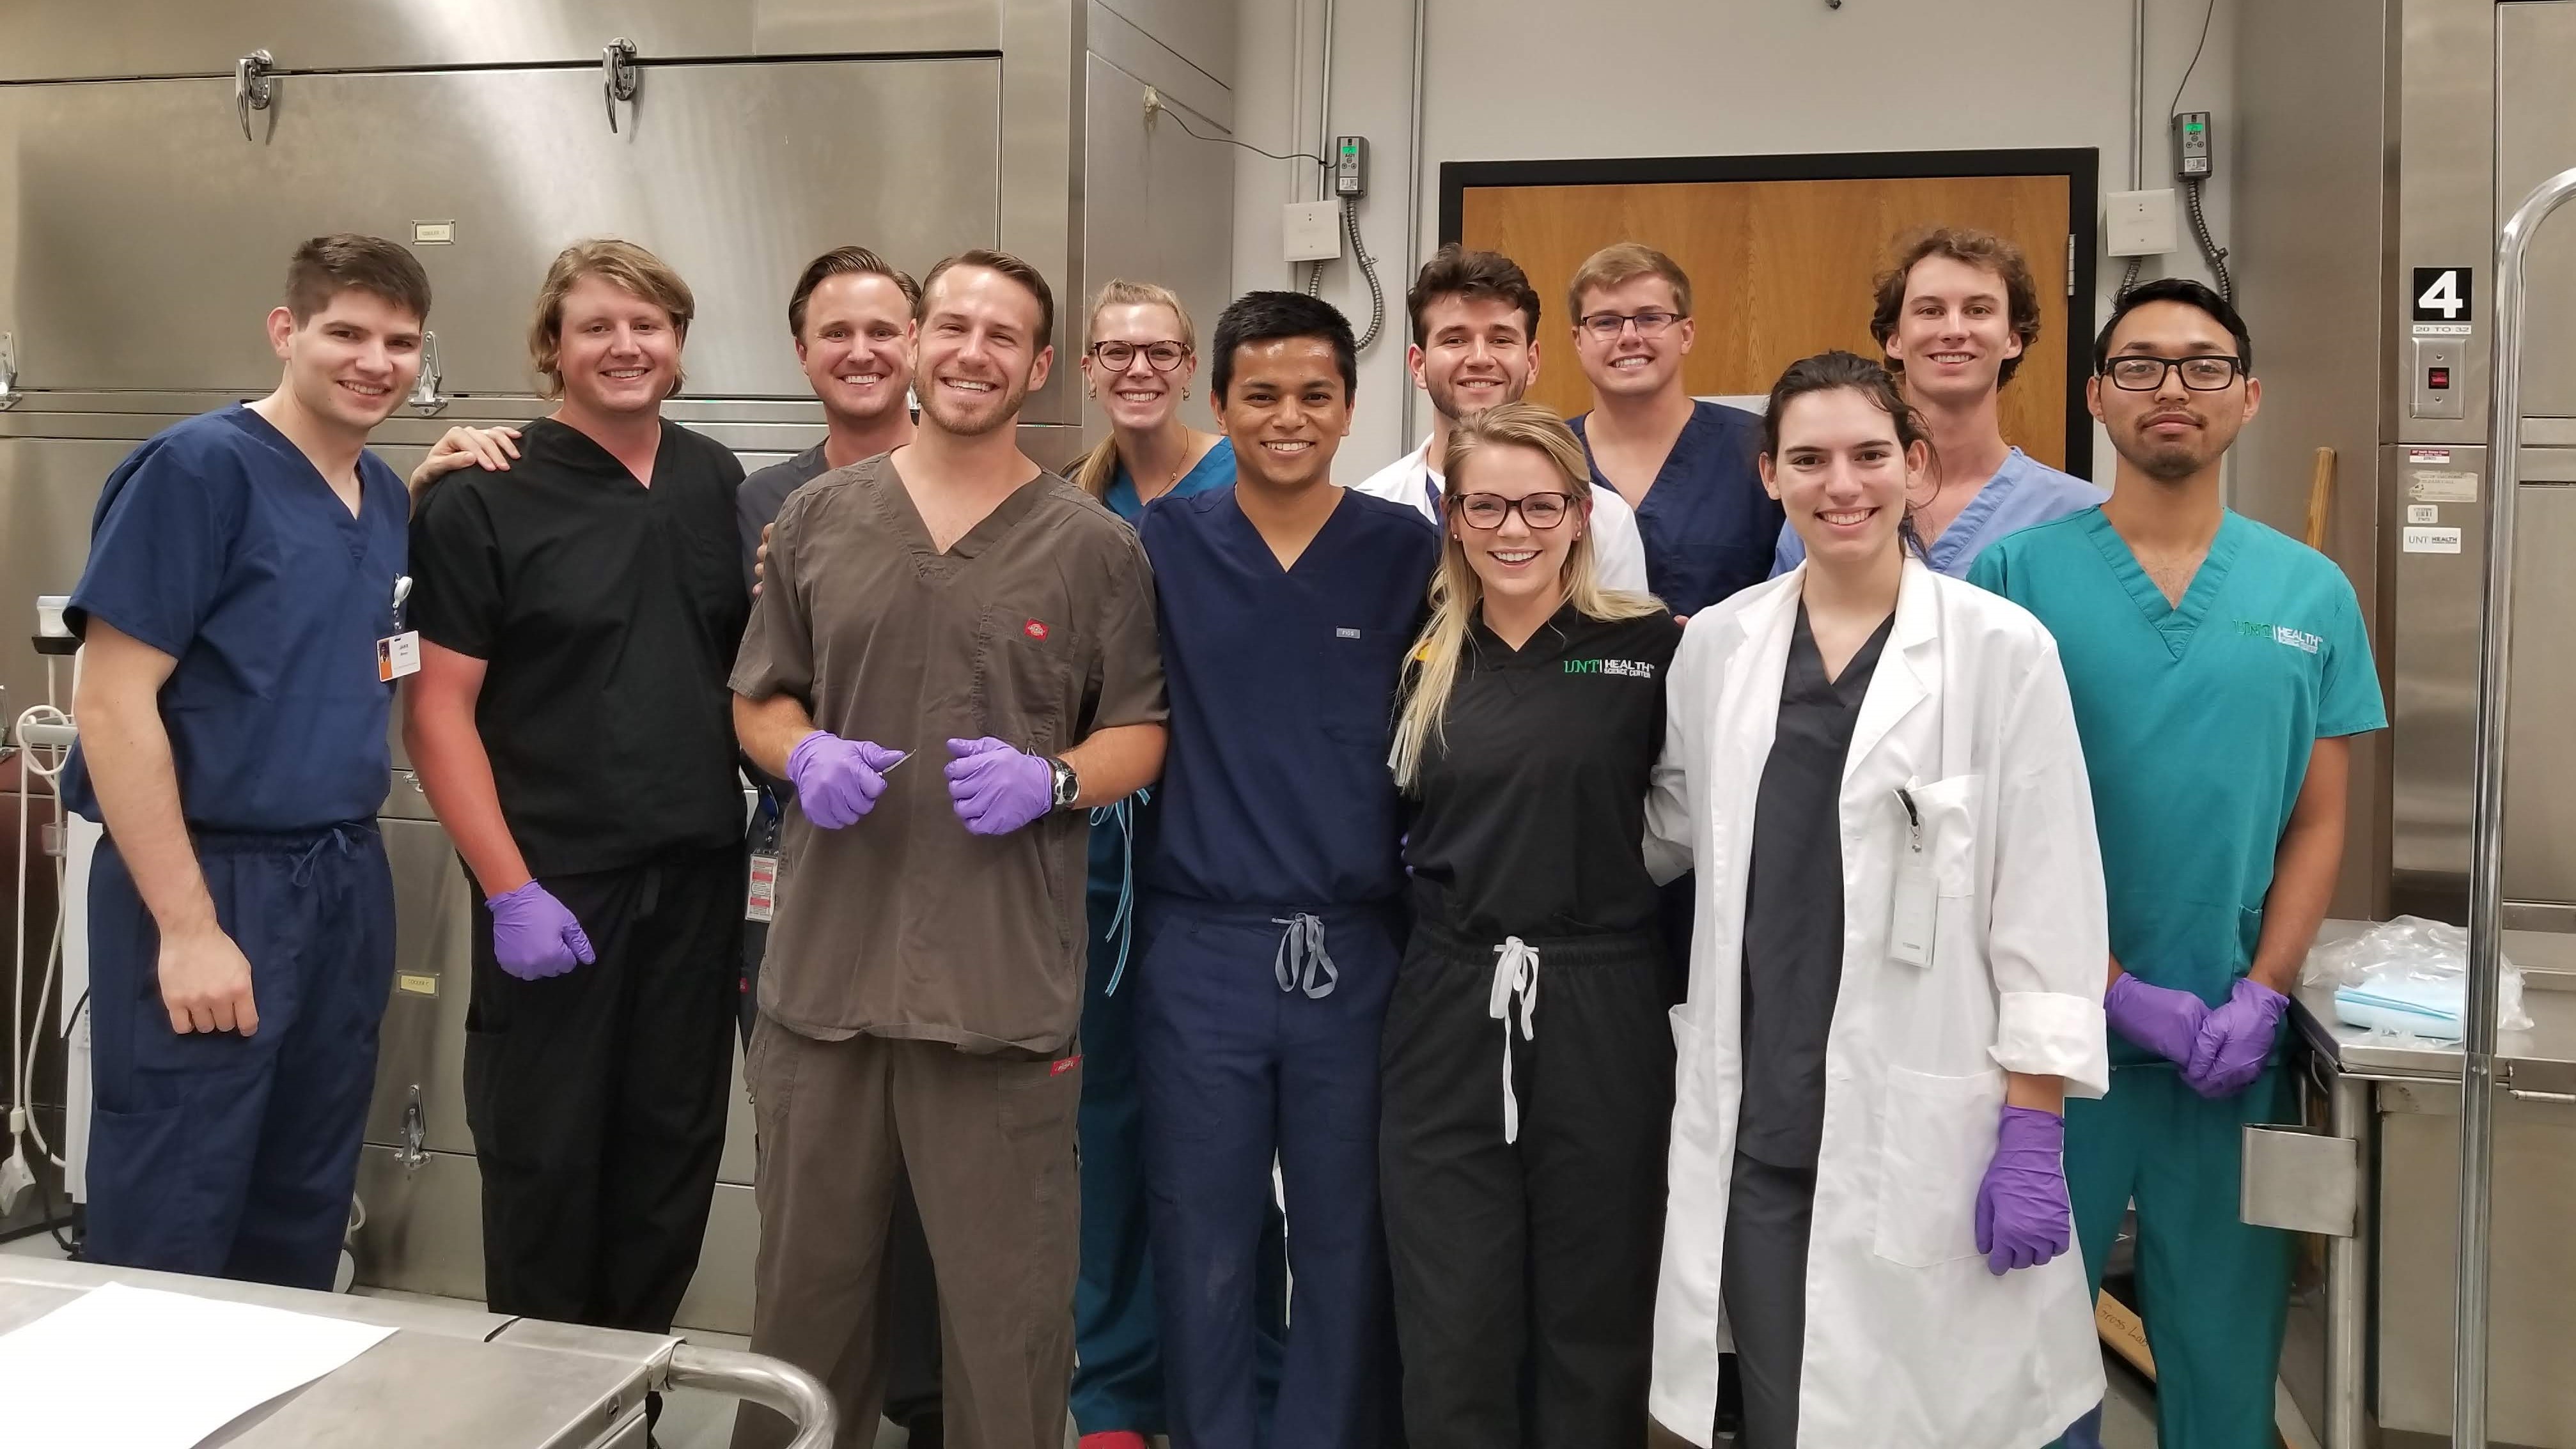 students in lab scrubs posing for a group photo